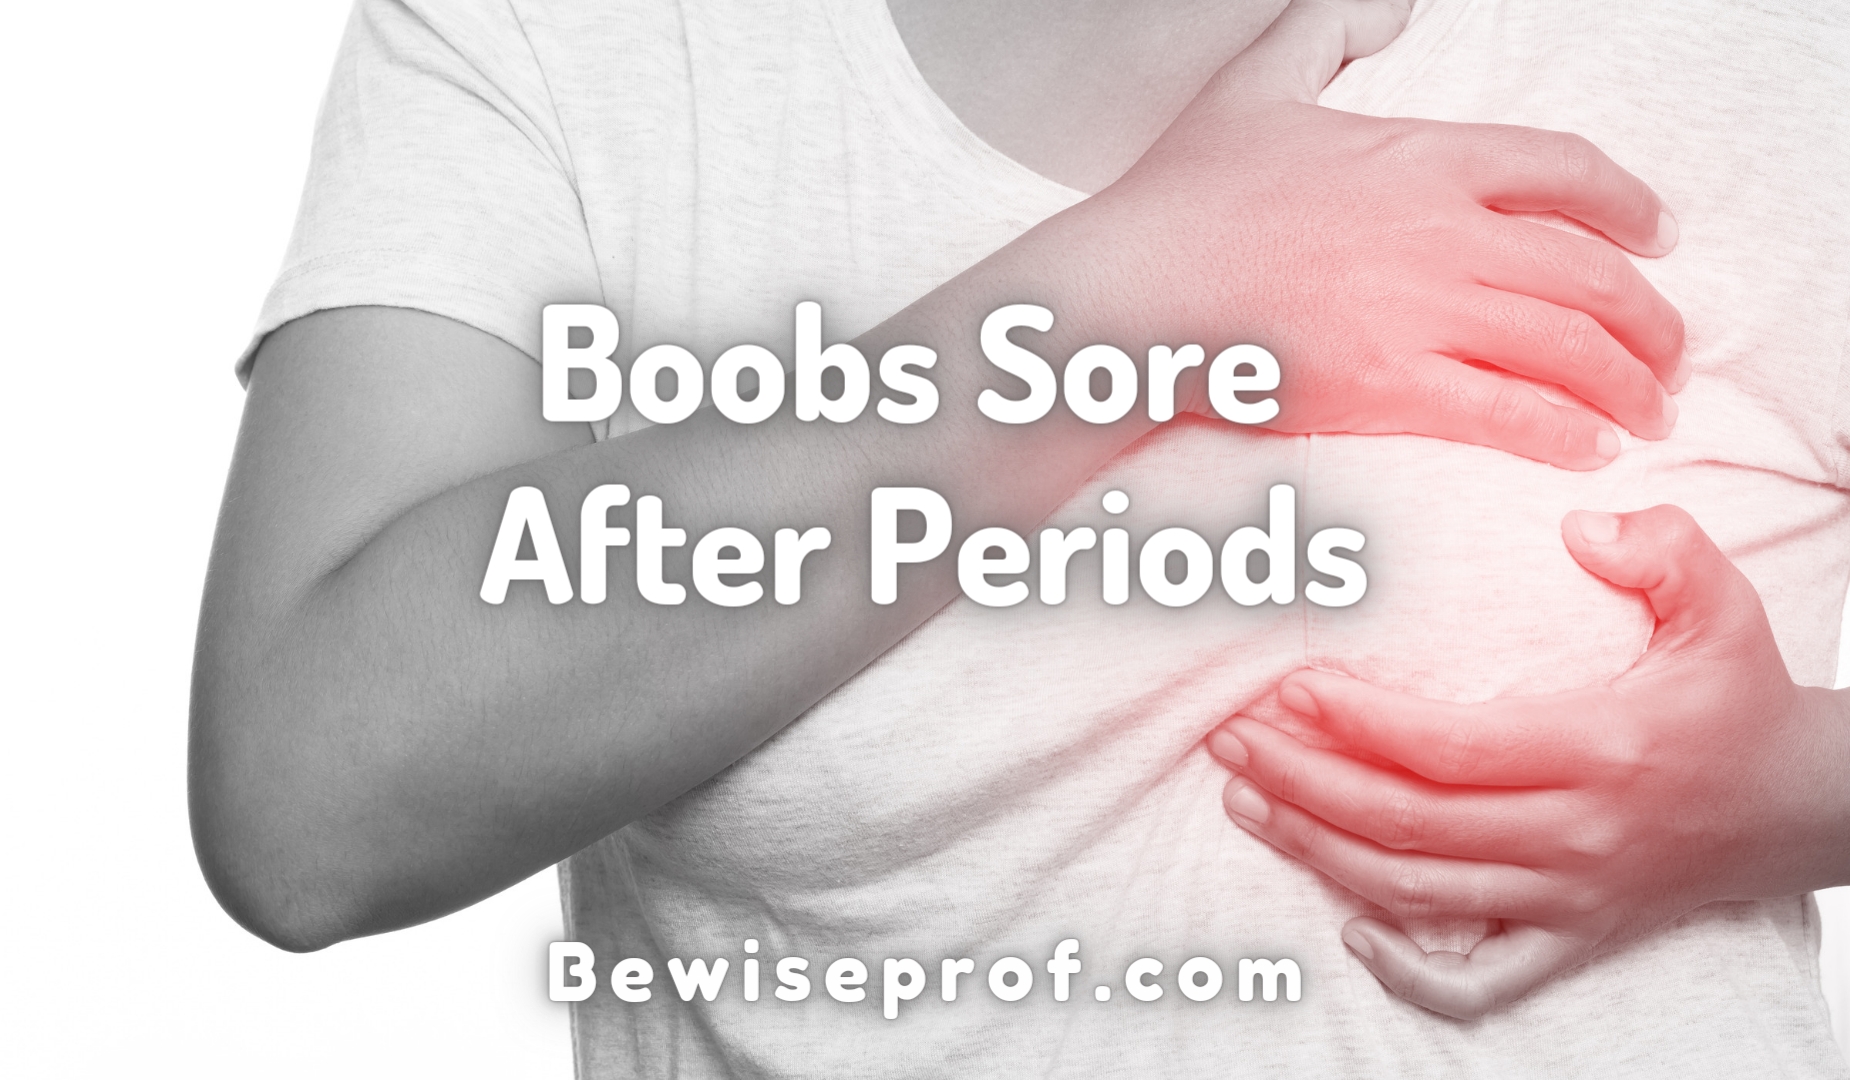 Boobs Sore After Periods